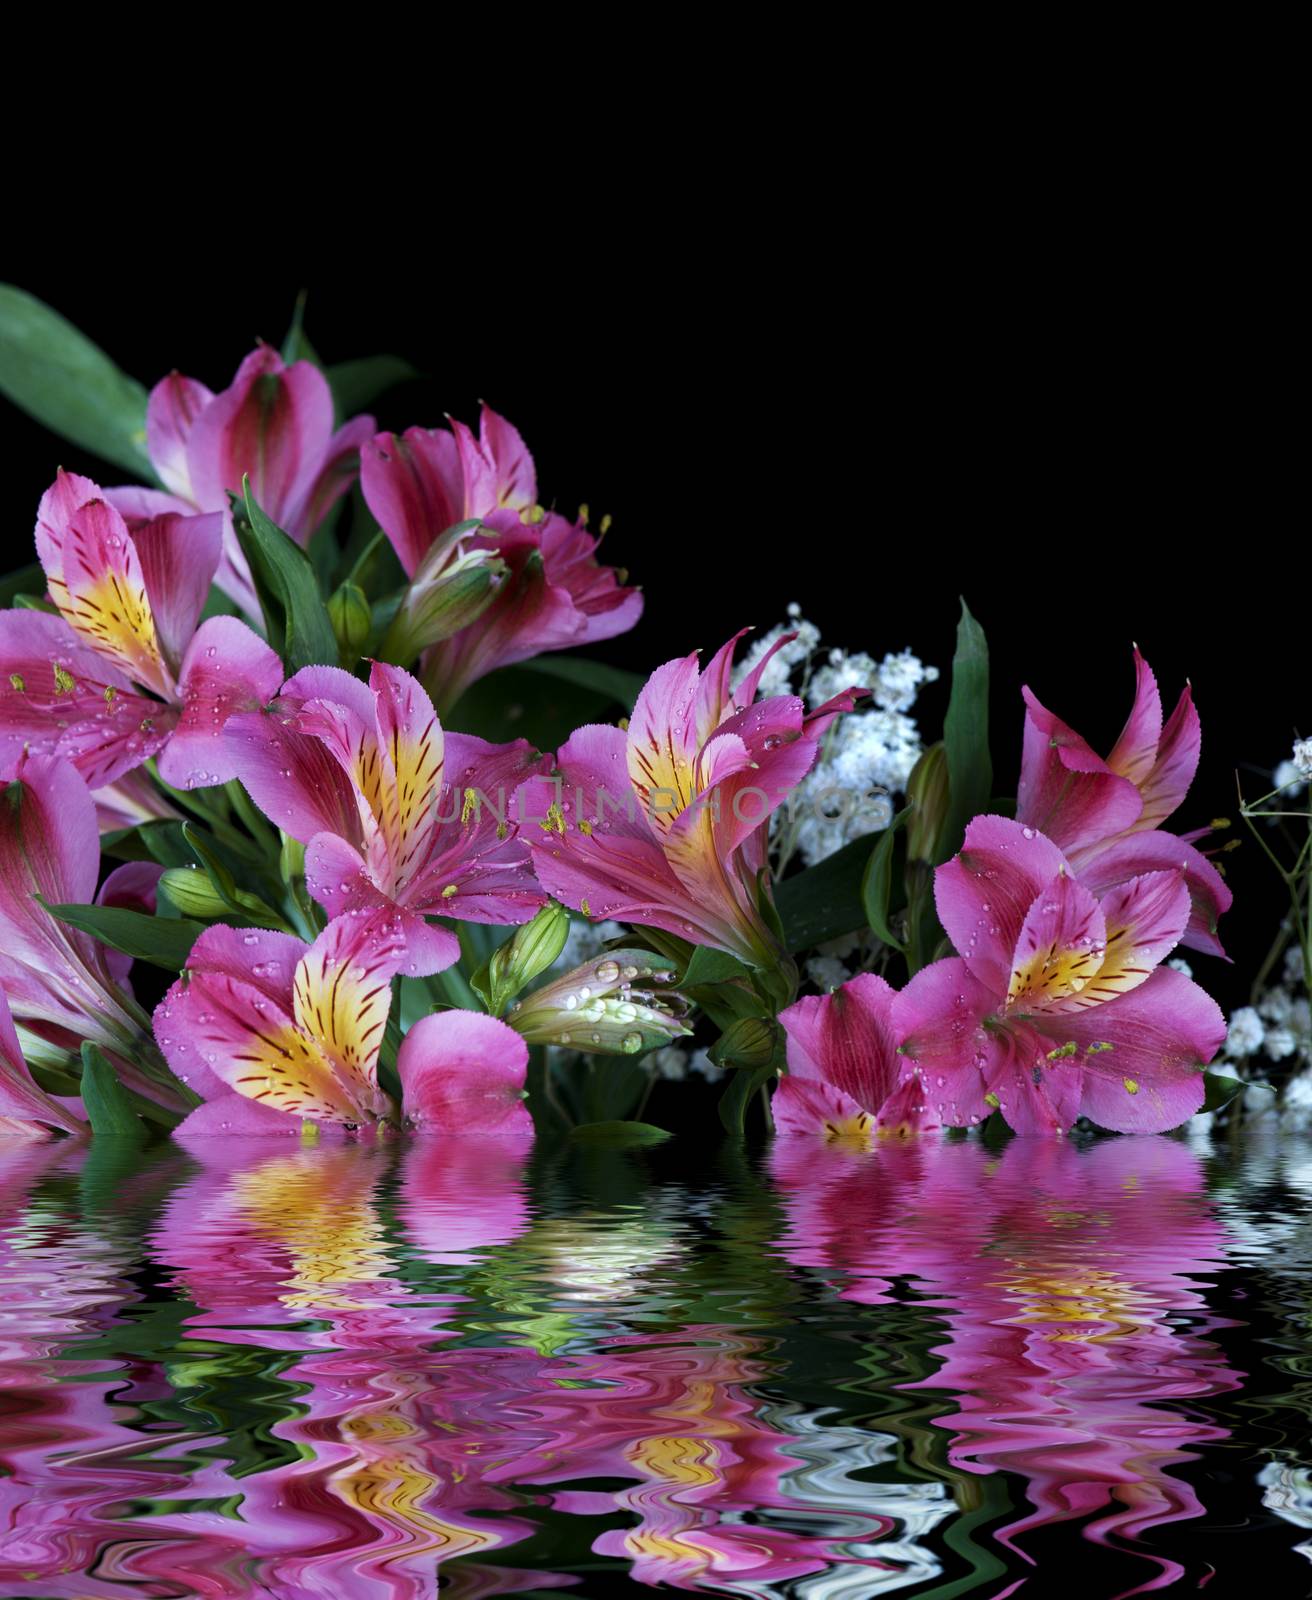 Alstroemeria flowers covered with dew drops isolated on a black background reflected in the water surface with small waves